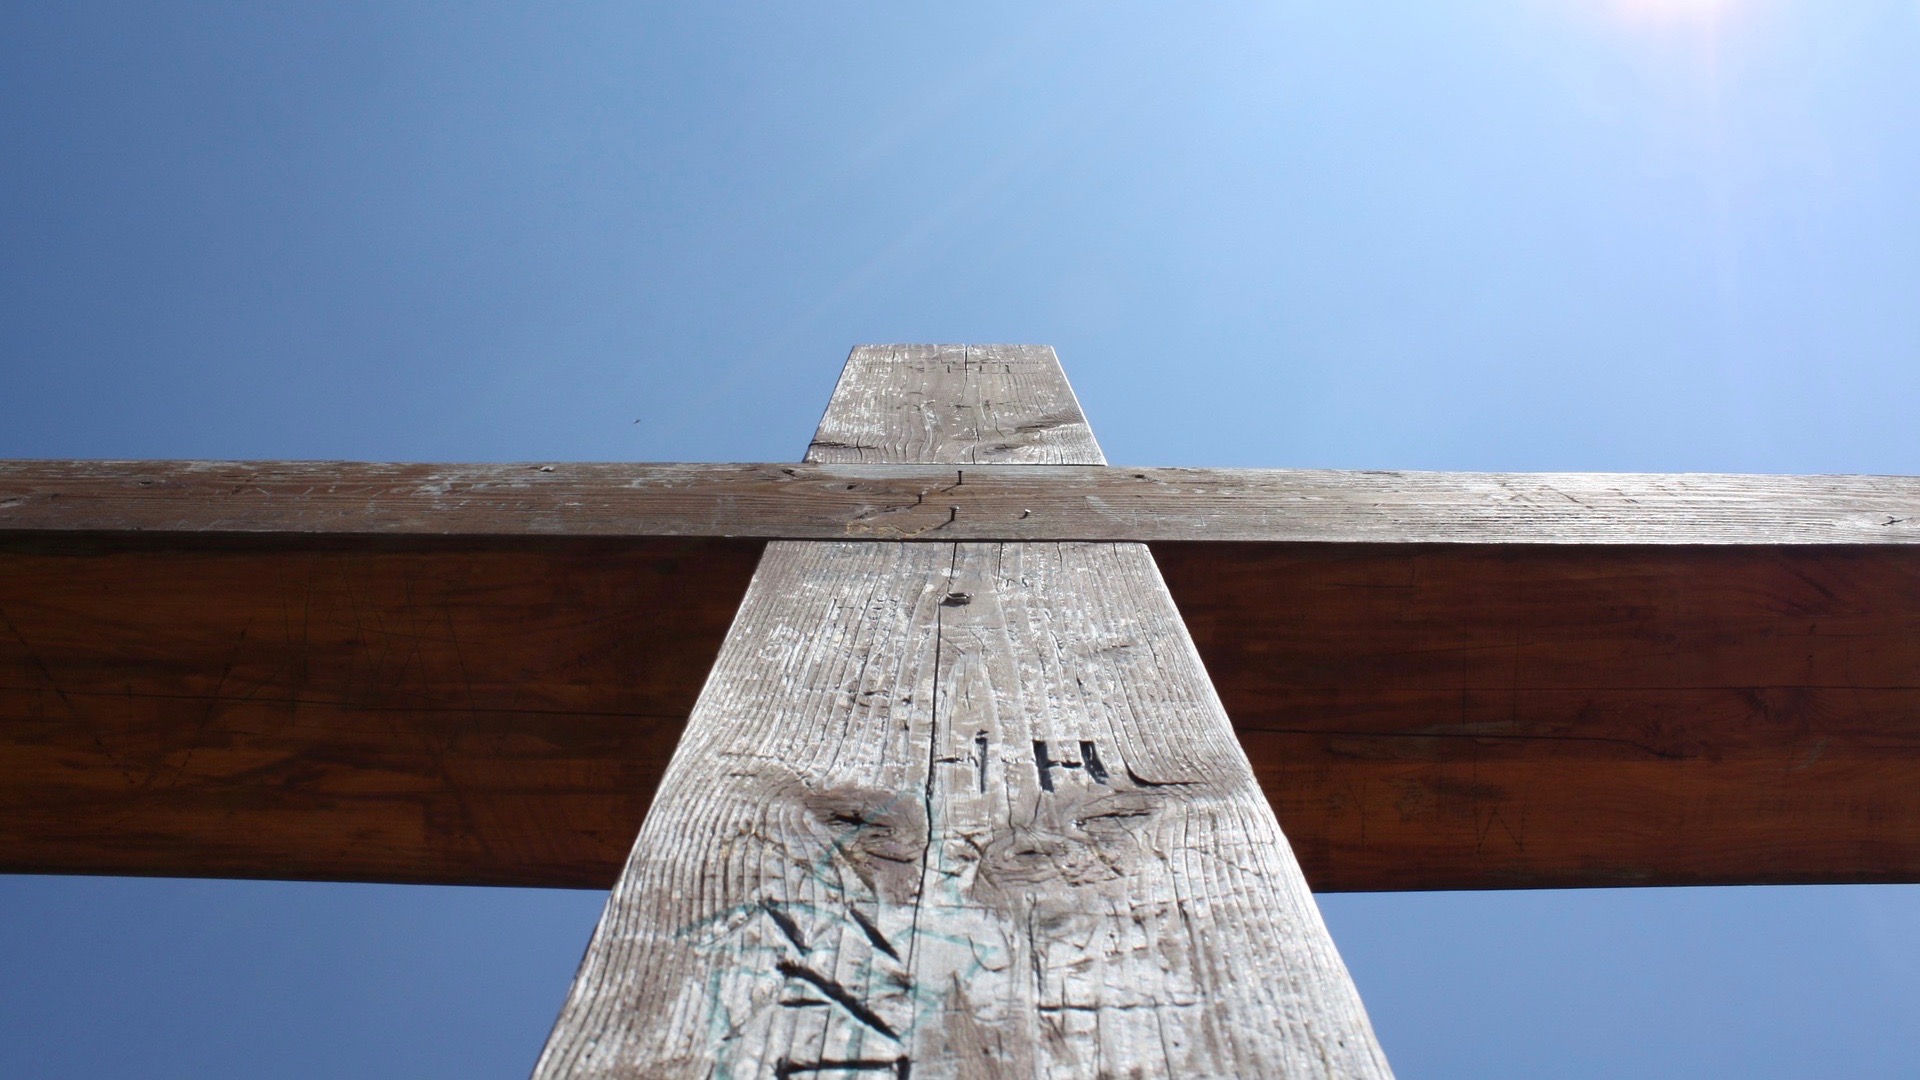 Looking upwards at a wooden cross